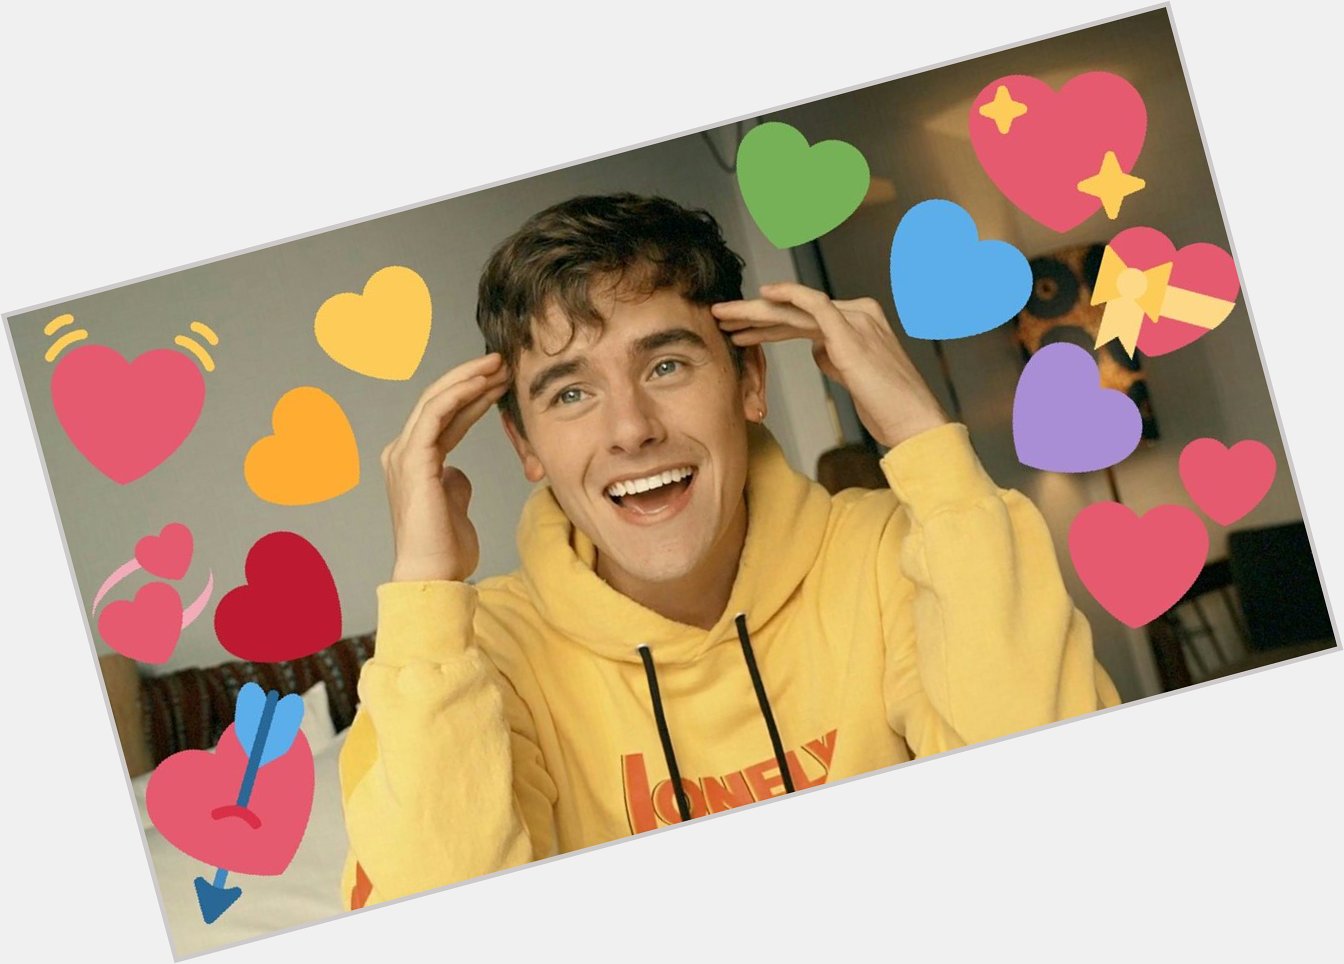 HAPPY BIRTHDAY ALSO TO CONNOR FRANTA BBY ILYSM AND ALWAYS BE THE AMAZING YOU U DESERVE THE WORLD ILY       